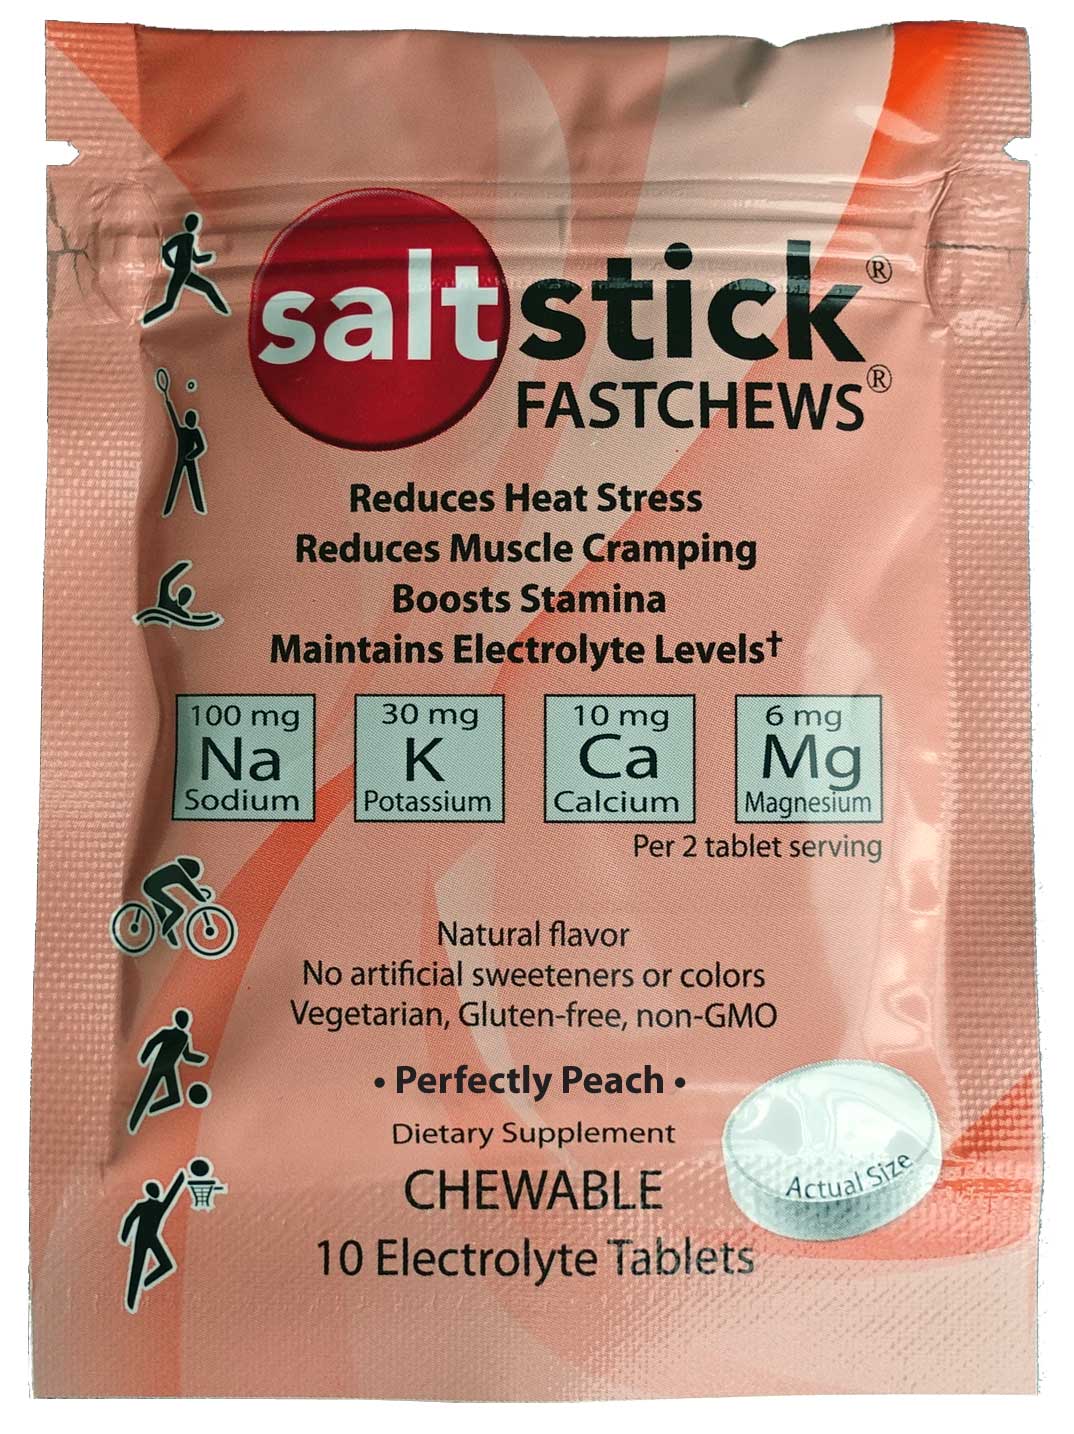 Perfectly Peach flavored Fastchews packet